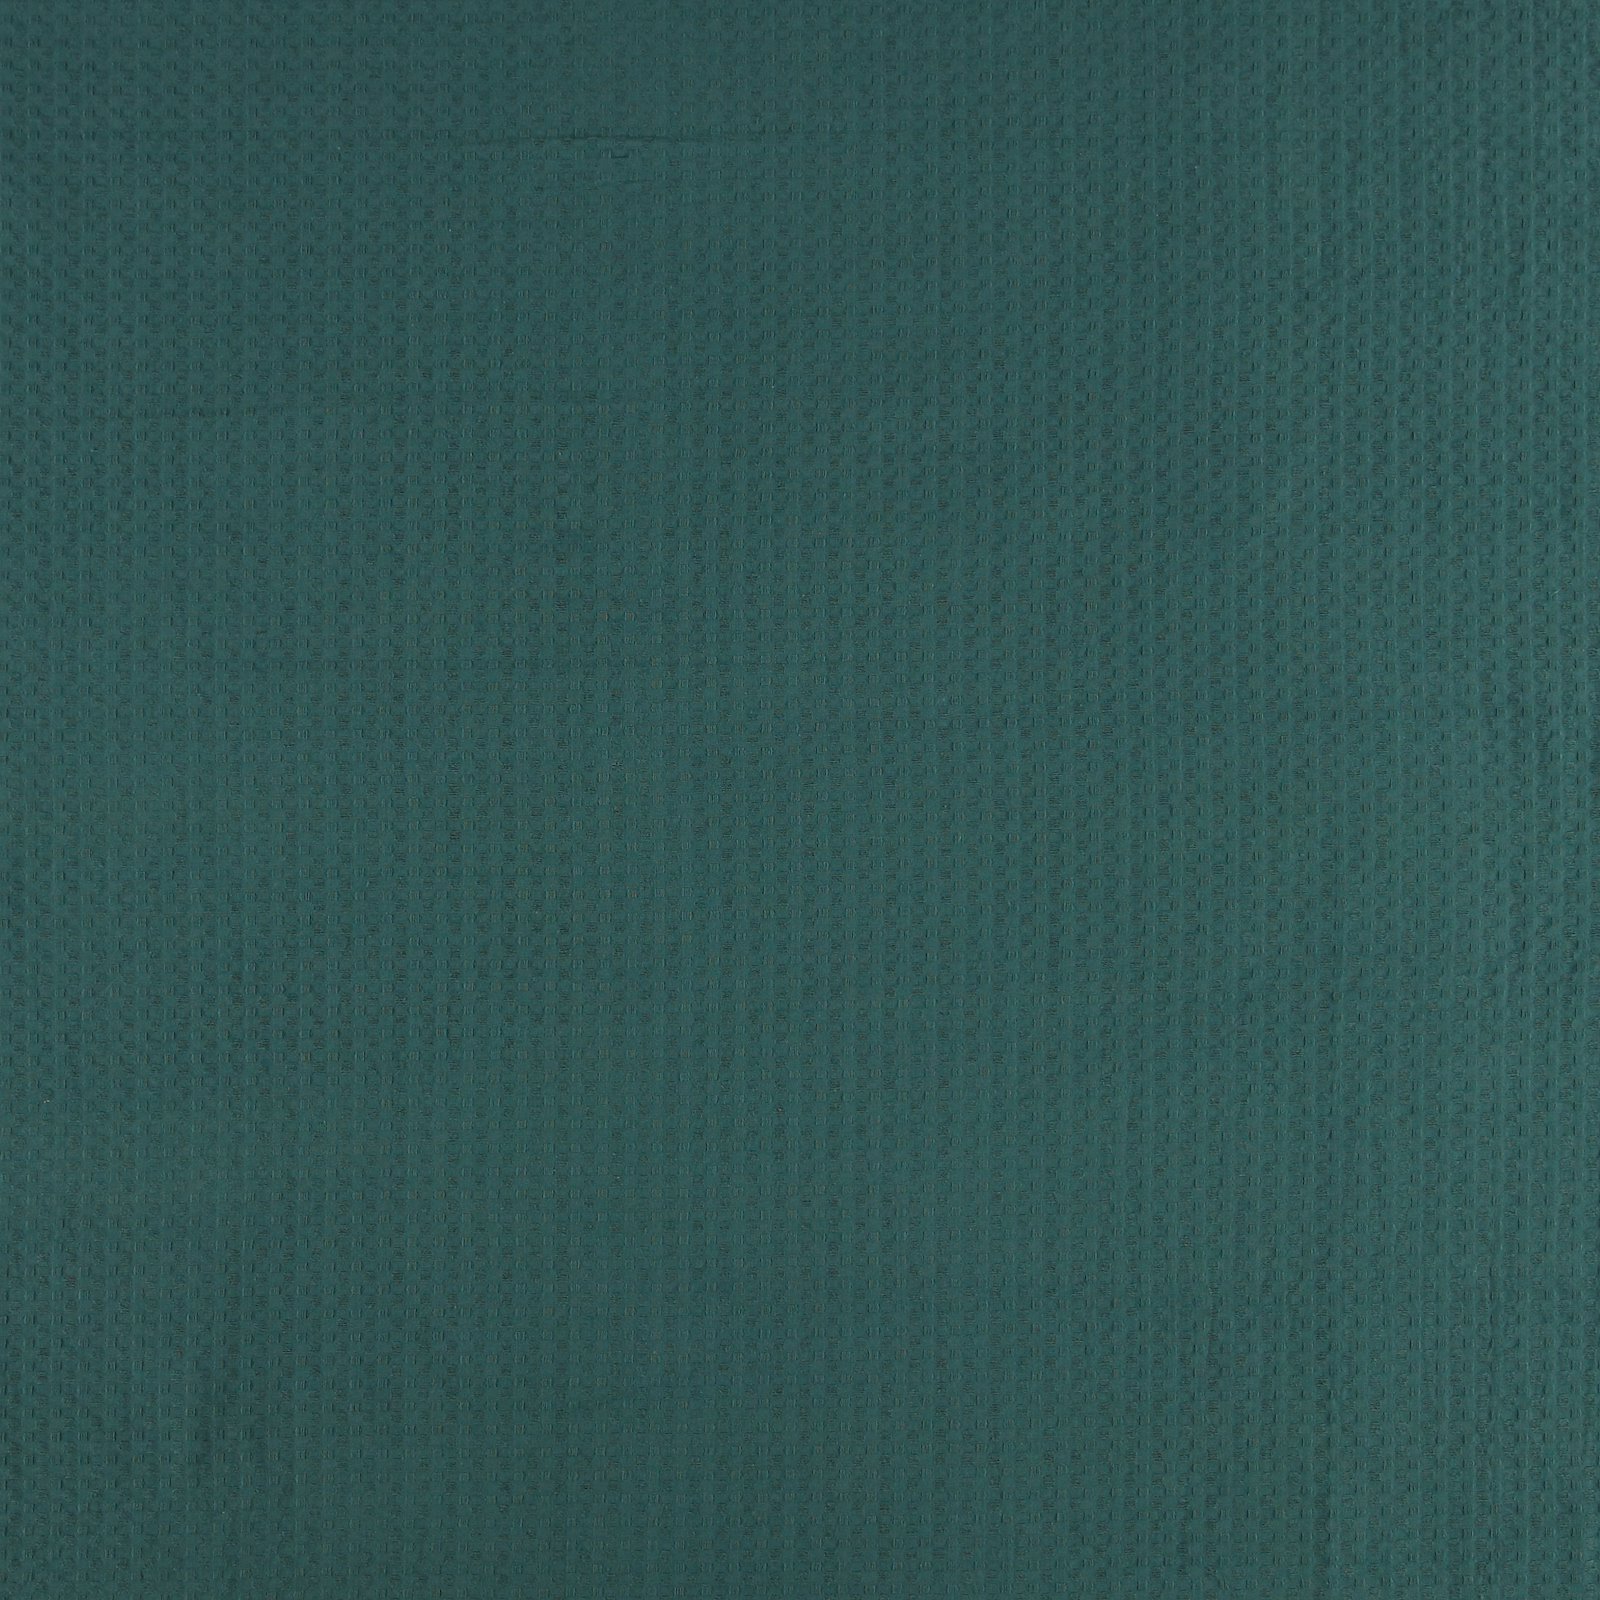 Woven jacquard petrol green w structure 501682_pack_solid